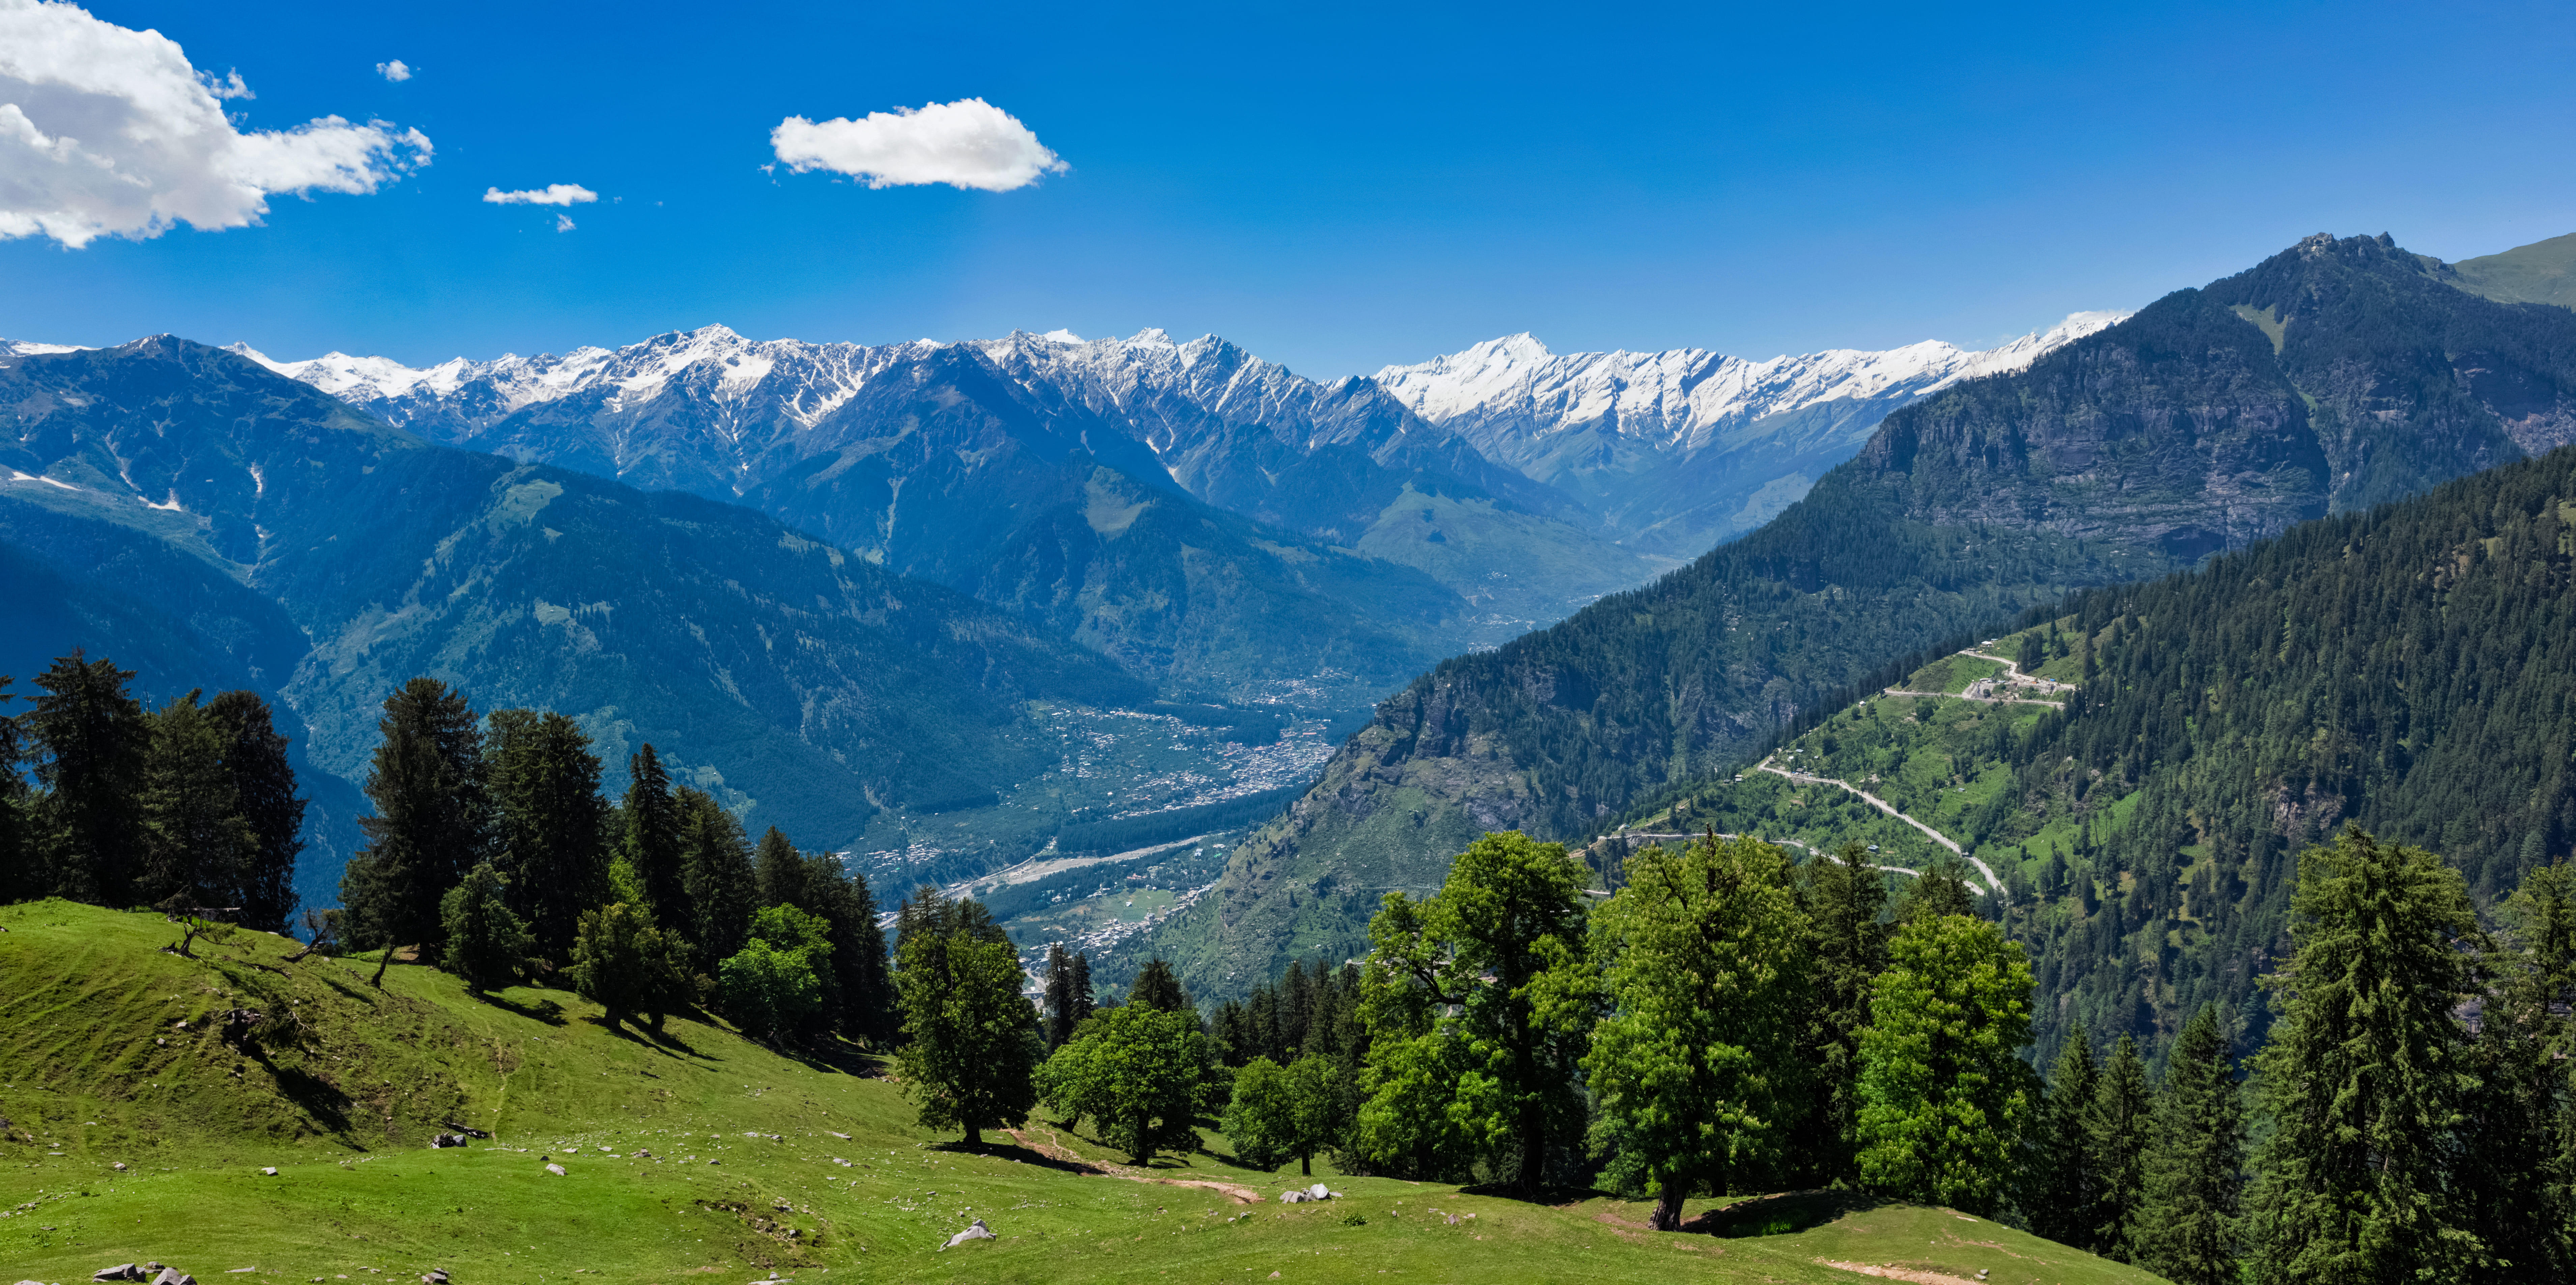 Unwind yourself in the tranquil surroundings of Manali and its tranquil environment